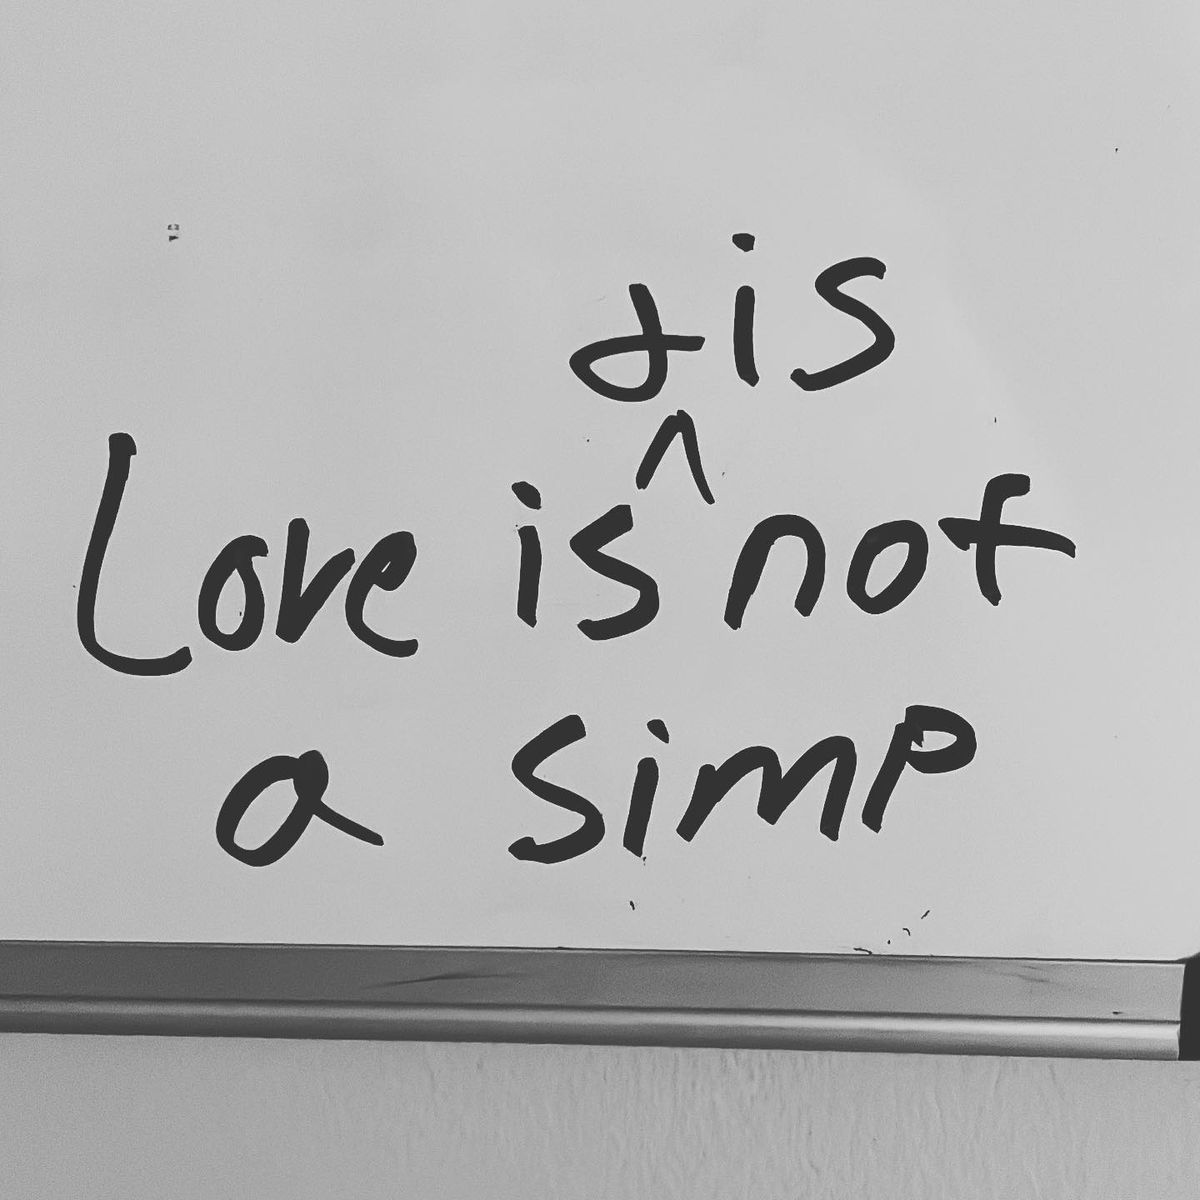 Love is (and is) not a simp